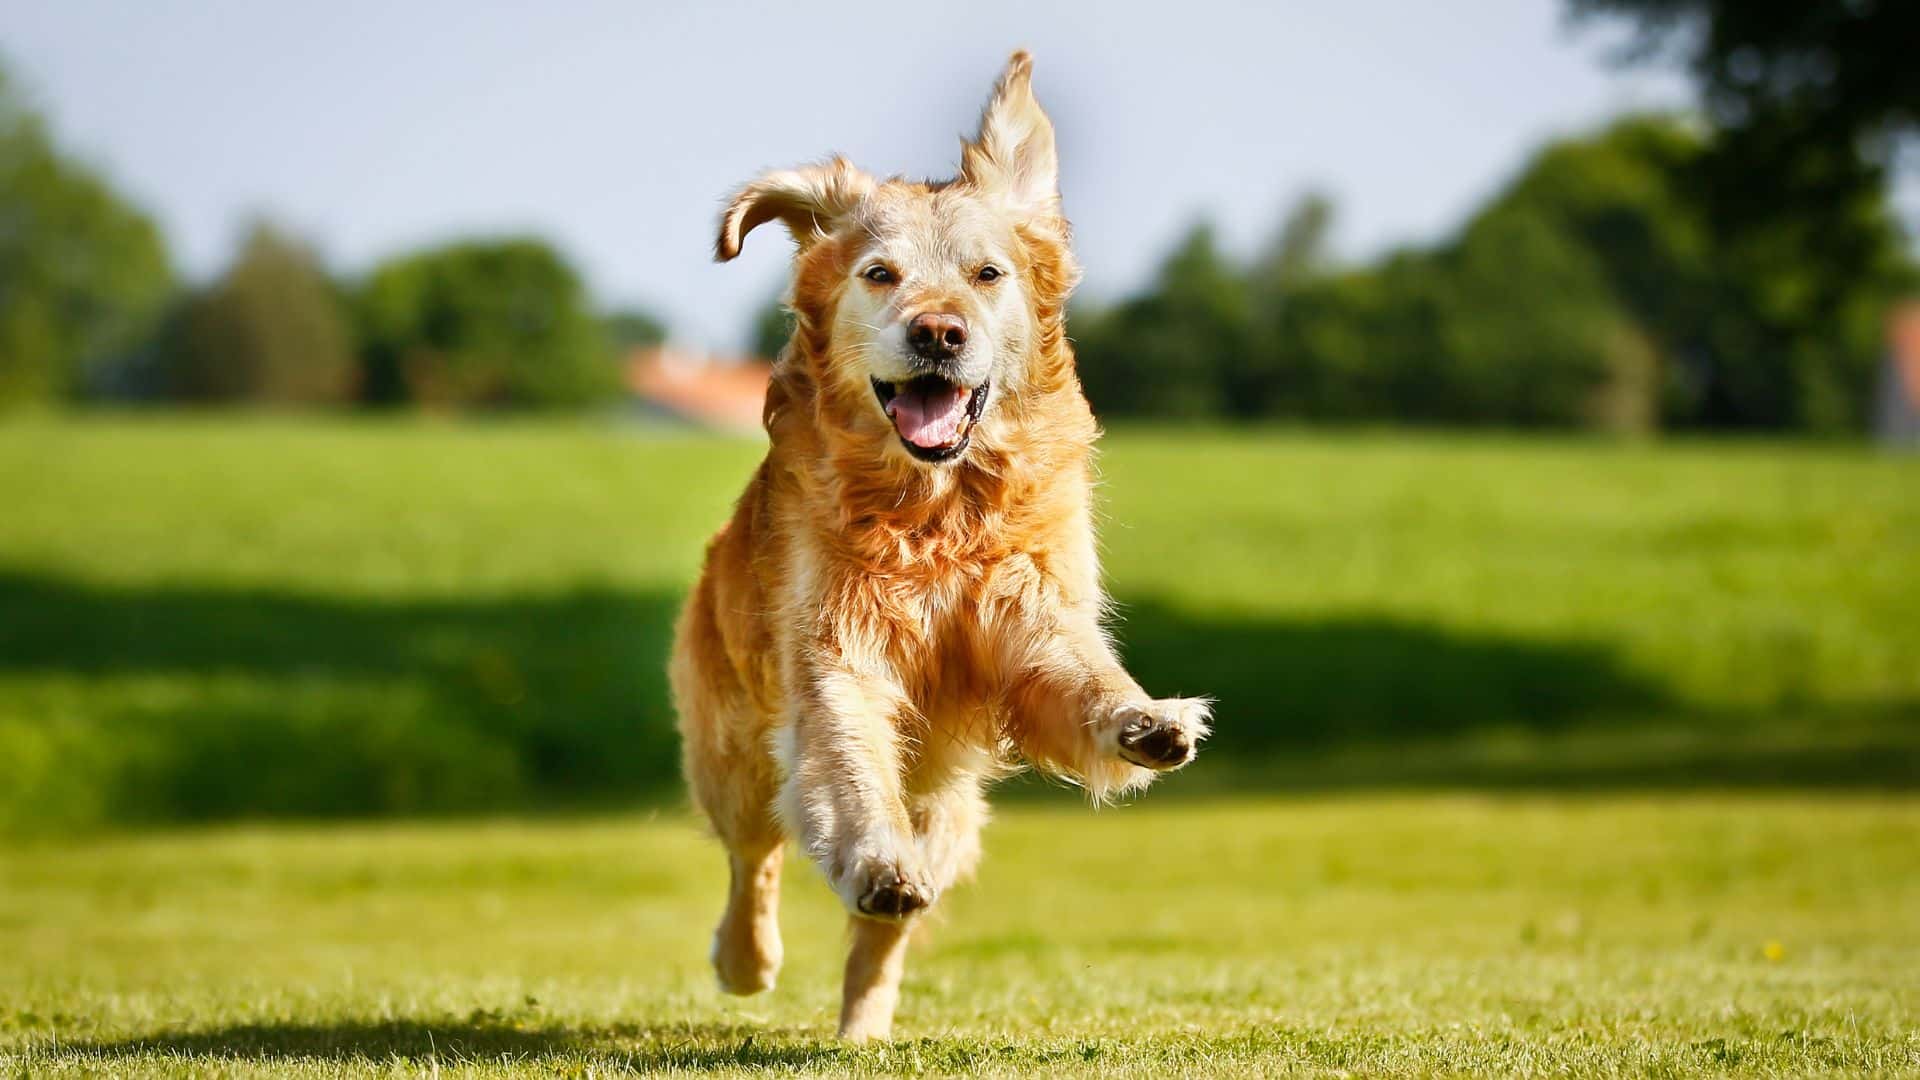 Dog essentials: Preparing for warm weather - A golden retriever leaping through a field of green grass in the sun.